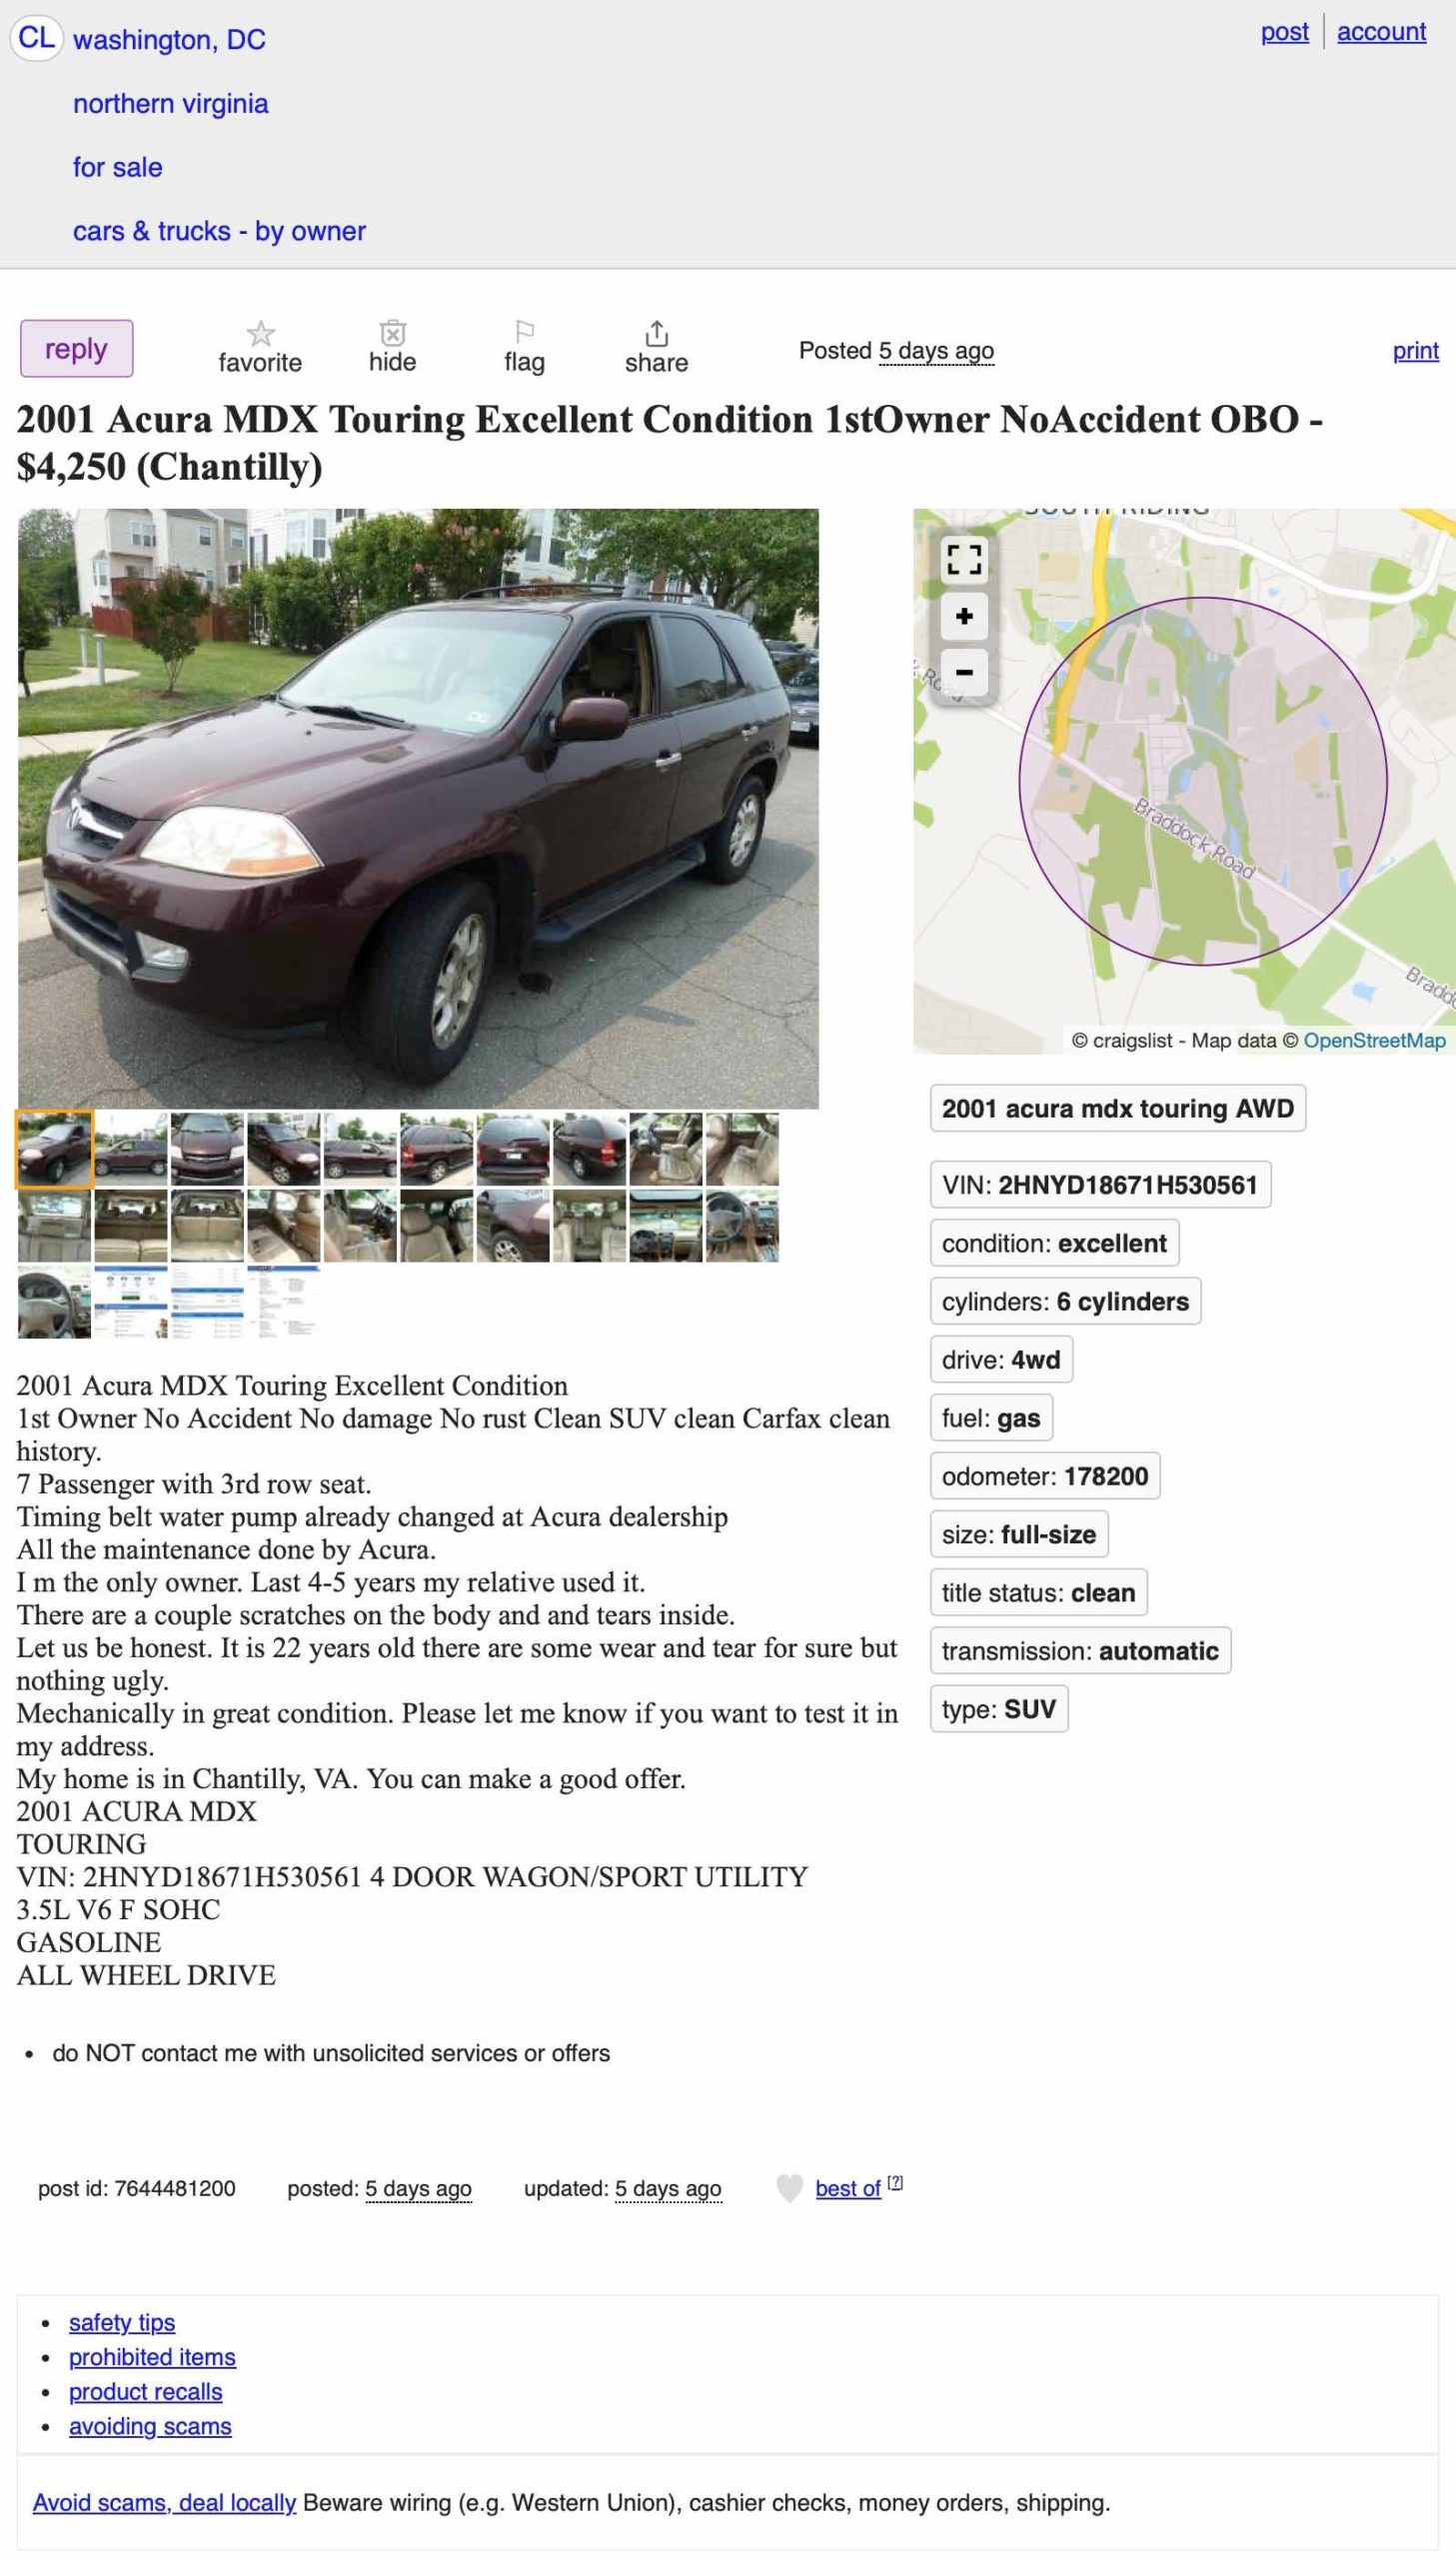 at $4,250, does this 2001 acura mdx touring offer three-rows worth of value?